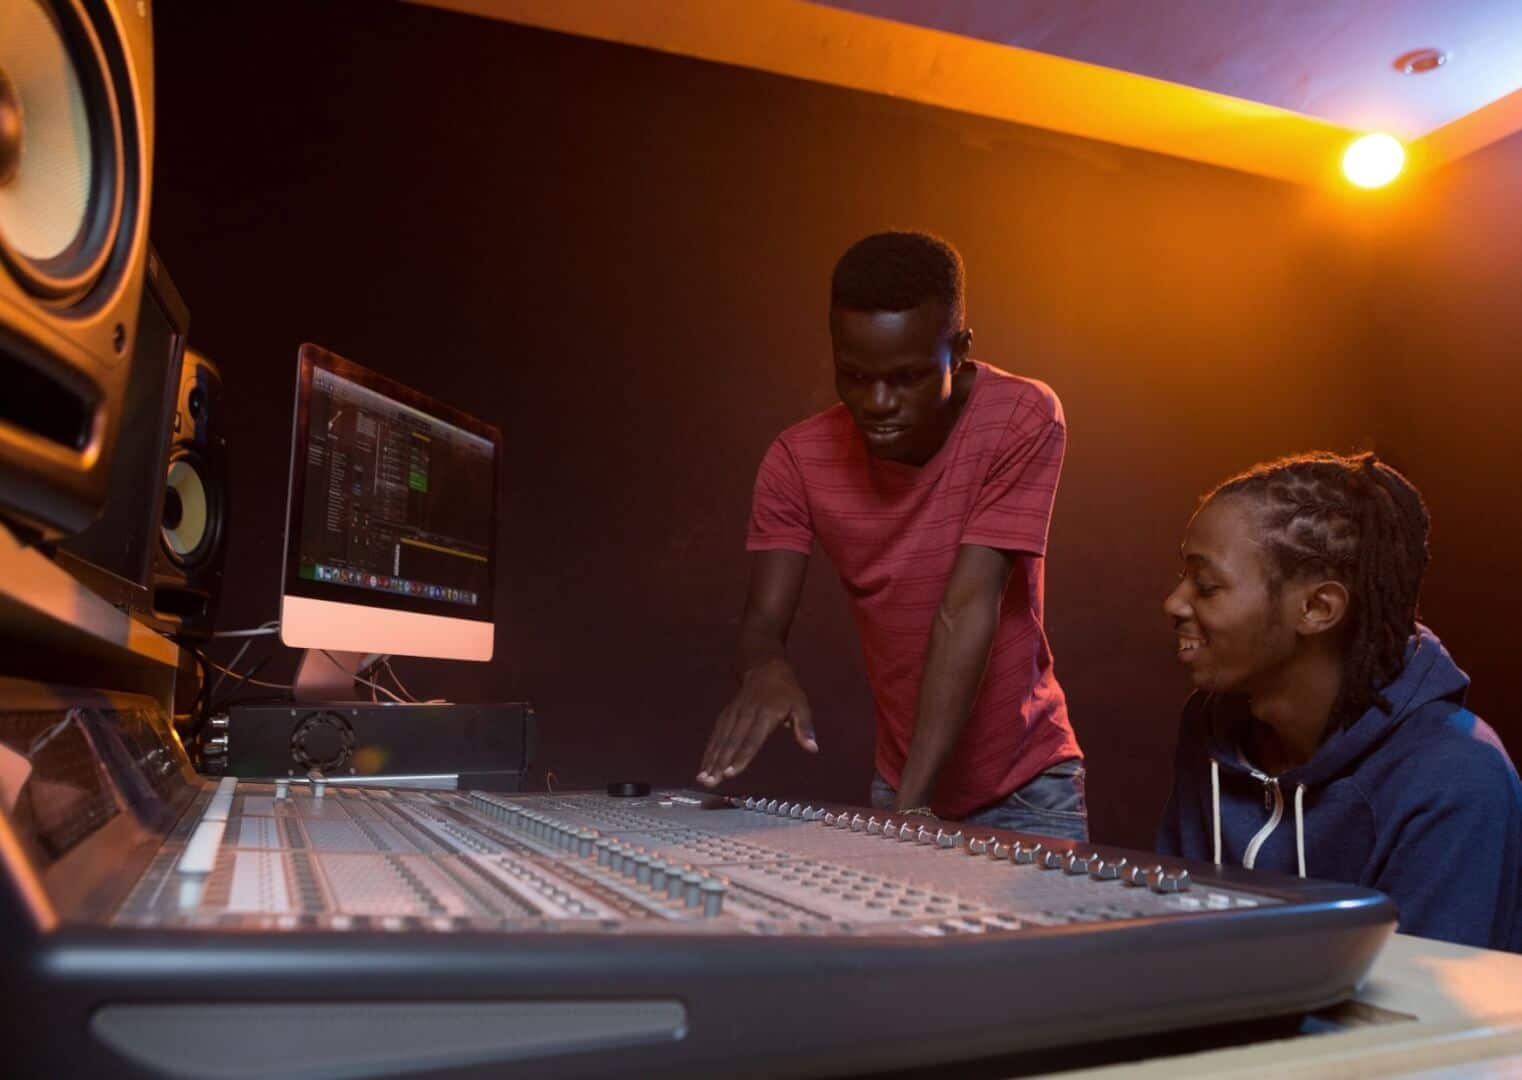 The course equips learners with basic technical skills and the requisite experience they need to pursue a diploma in Music Production or Sound Engineering